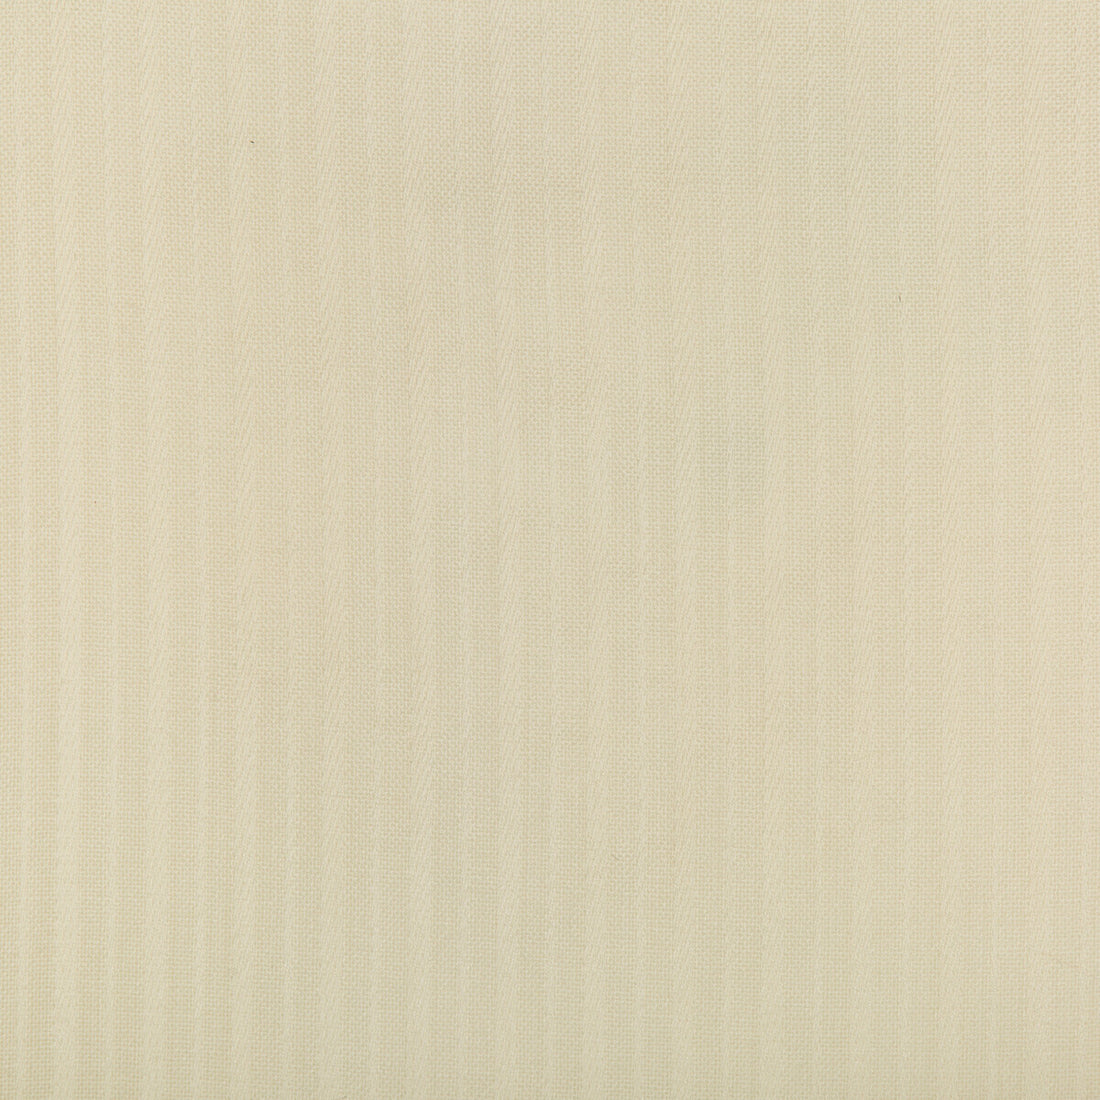 Clyne Sheer fabric in ivory color - pattern 2017114.101.0 - by Lee Jofa in the Helmsdale Sheers collection